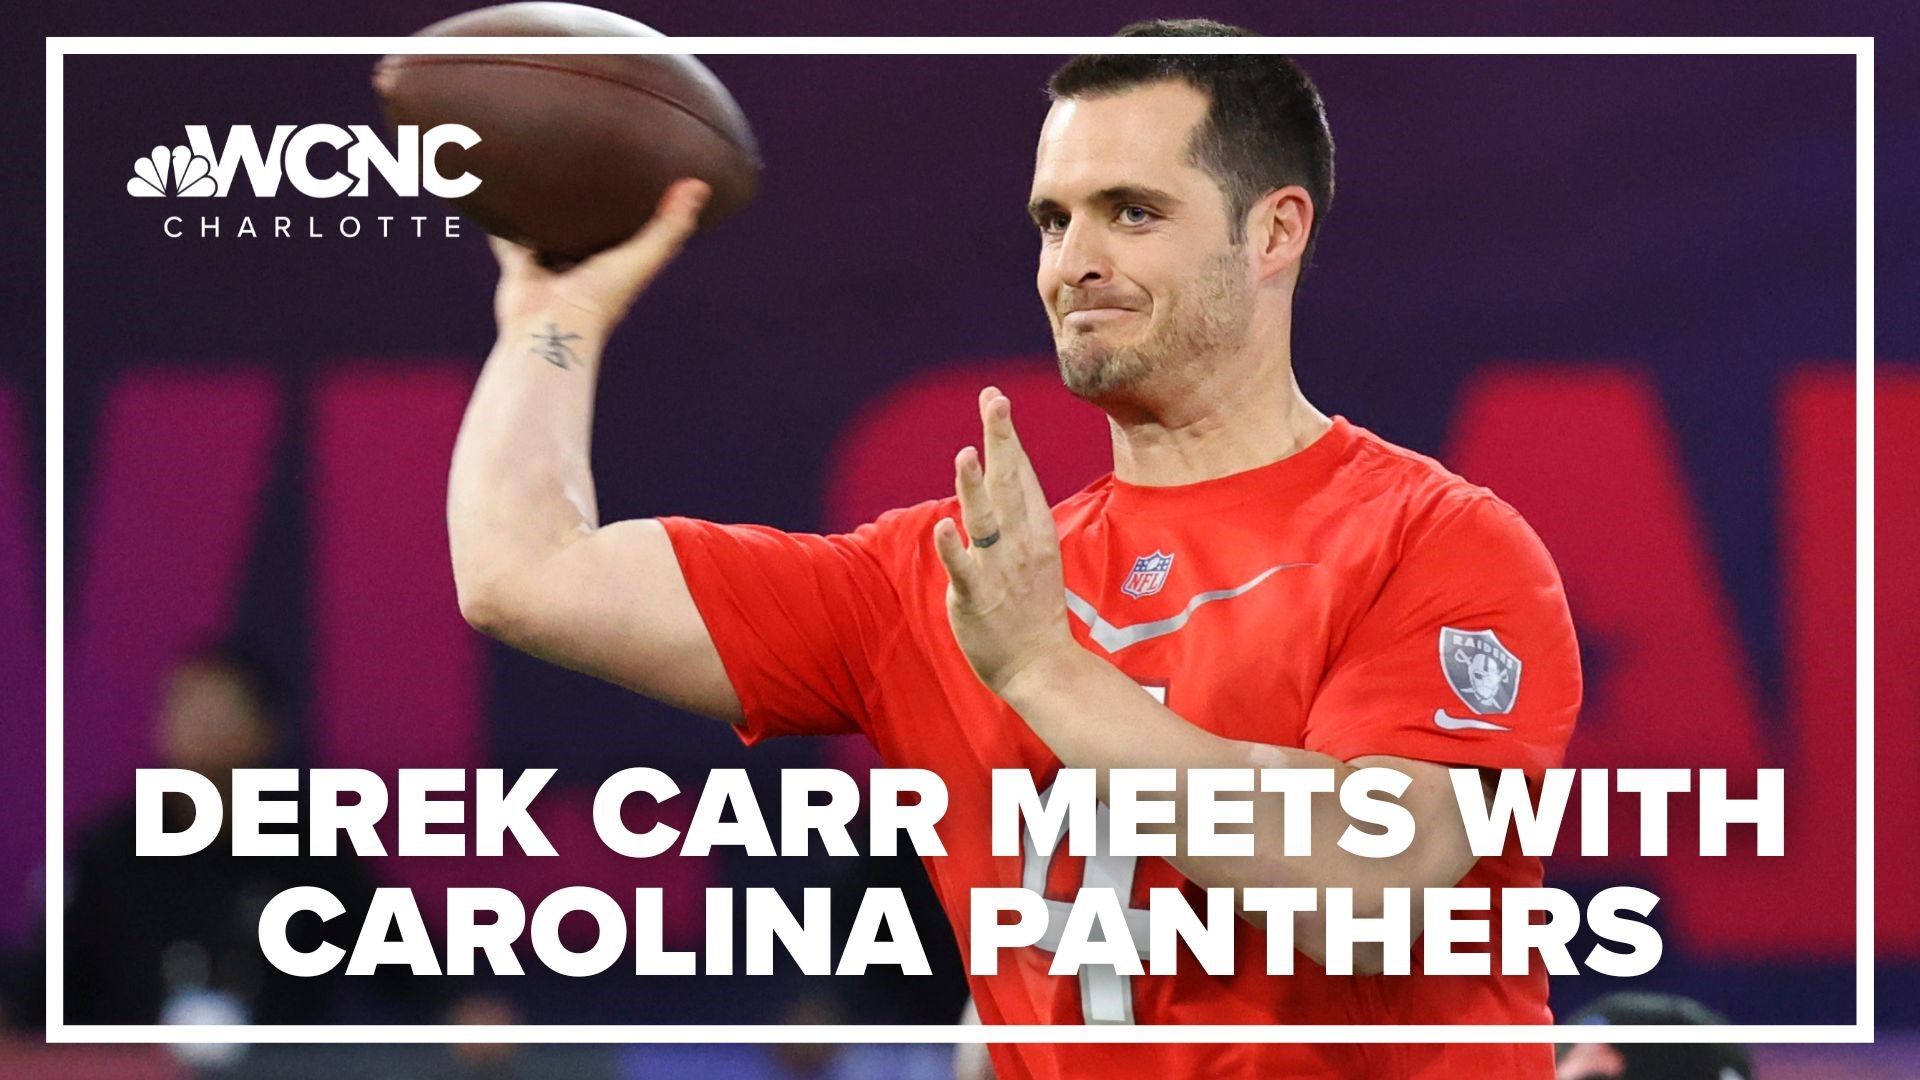 Free agent quarterback Derek Carr met with the Panthers at the NFL Combine. Here's what head coach Frank Reich said of the team's meeting.